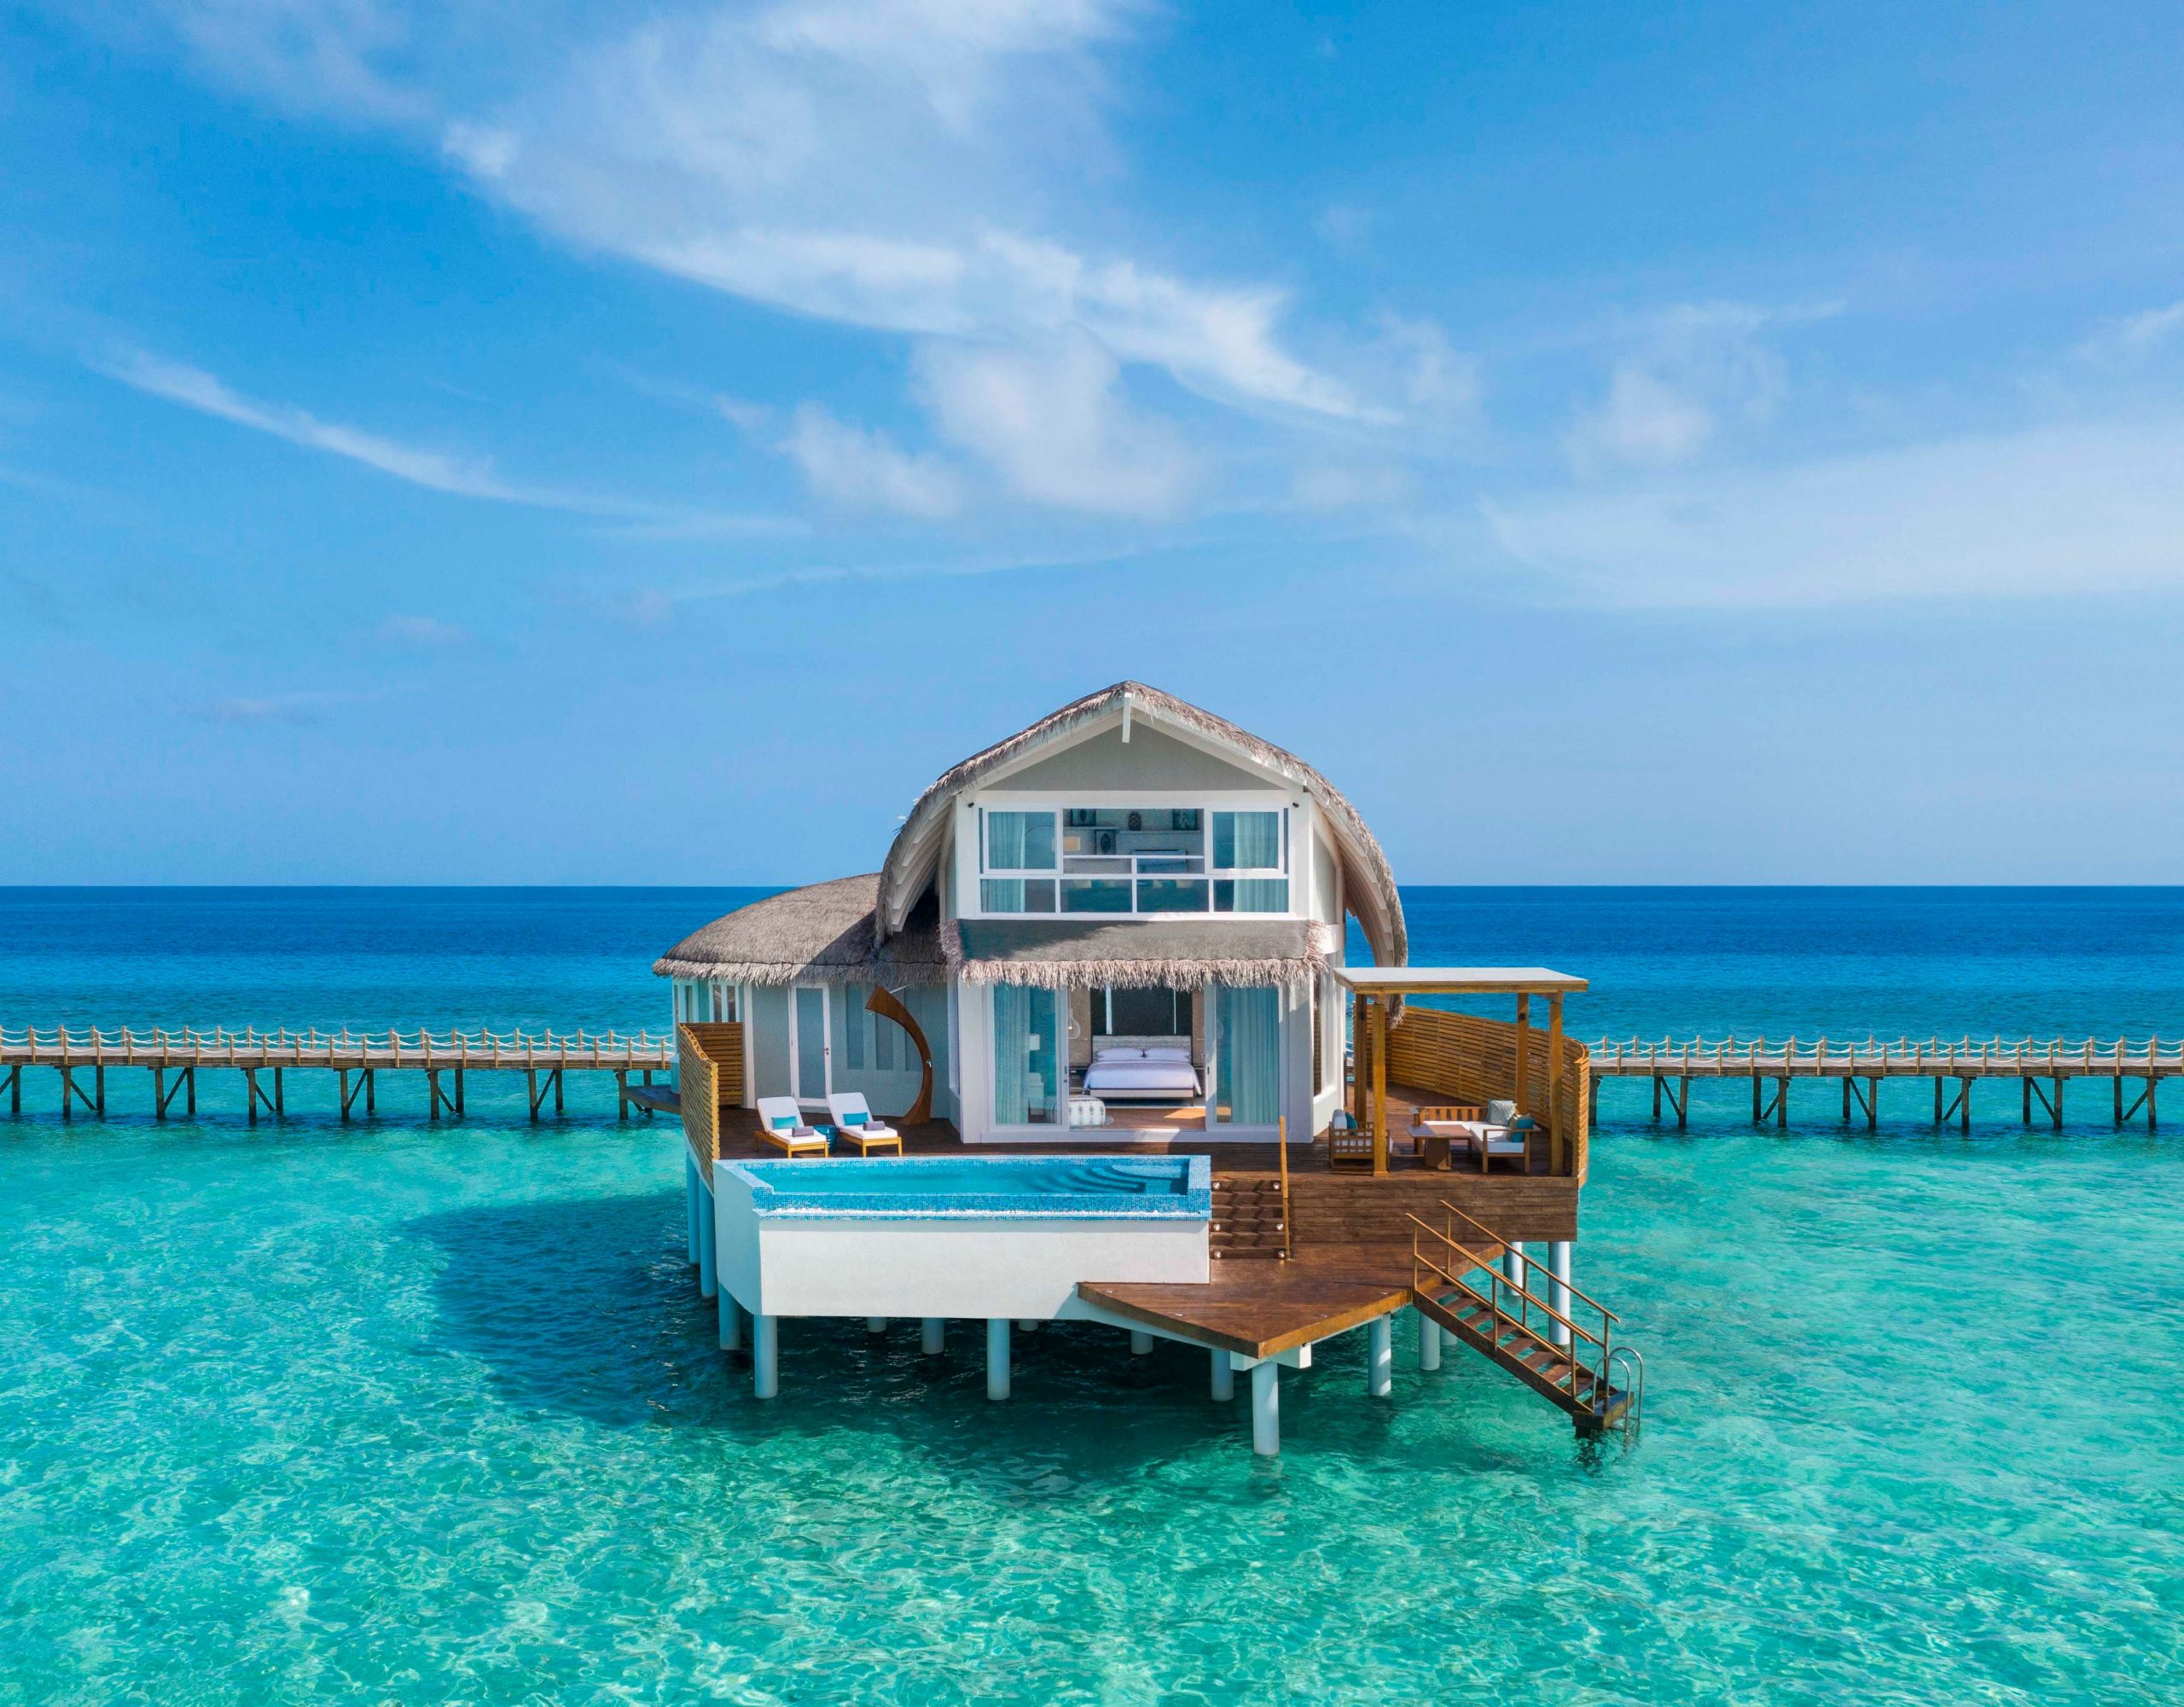 TREAT YOURSELF TO A LUXURY ALL-INCLUSIVE STAY AT JW MARRIOTT MALDIVES RESORT & SPA